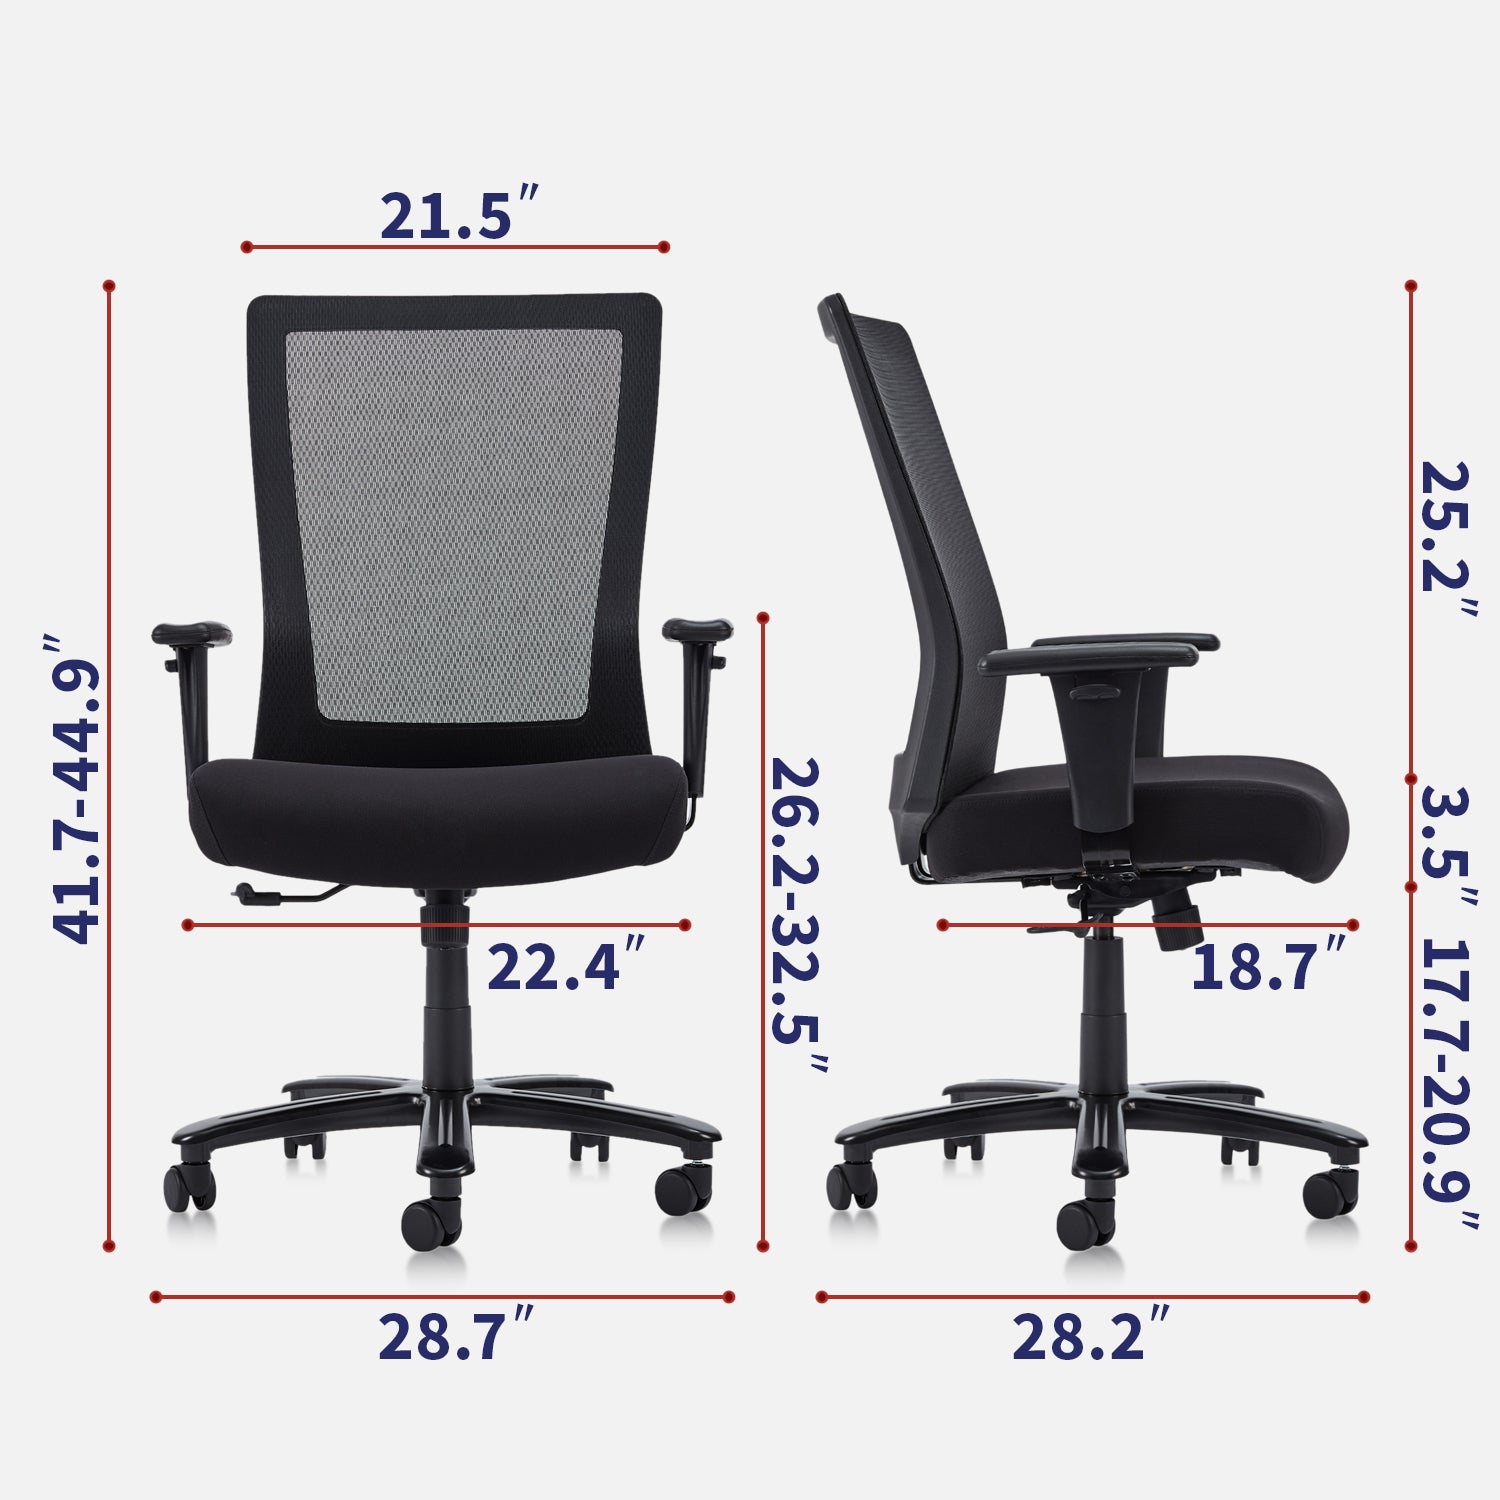 CLATINA Big and Tall Executive Chair Ergonomic with 400lbs High Capacity Adjustable Armrest and Breathable Mesh Back for Home Office Black BIFMA Certification No. 5.11 (1 Pack)